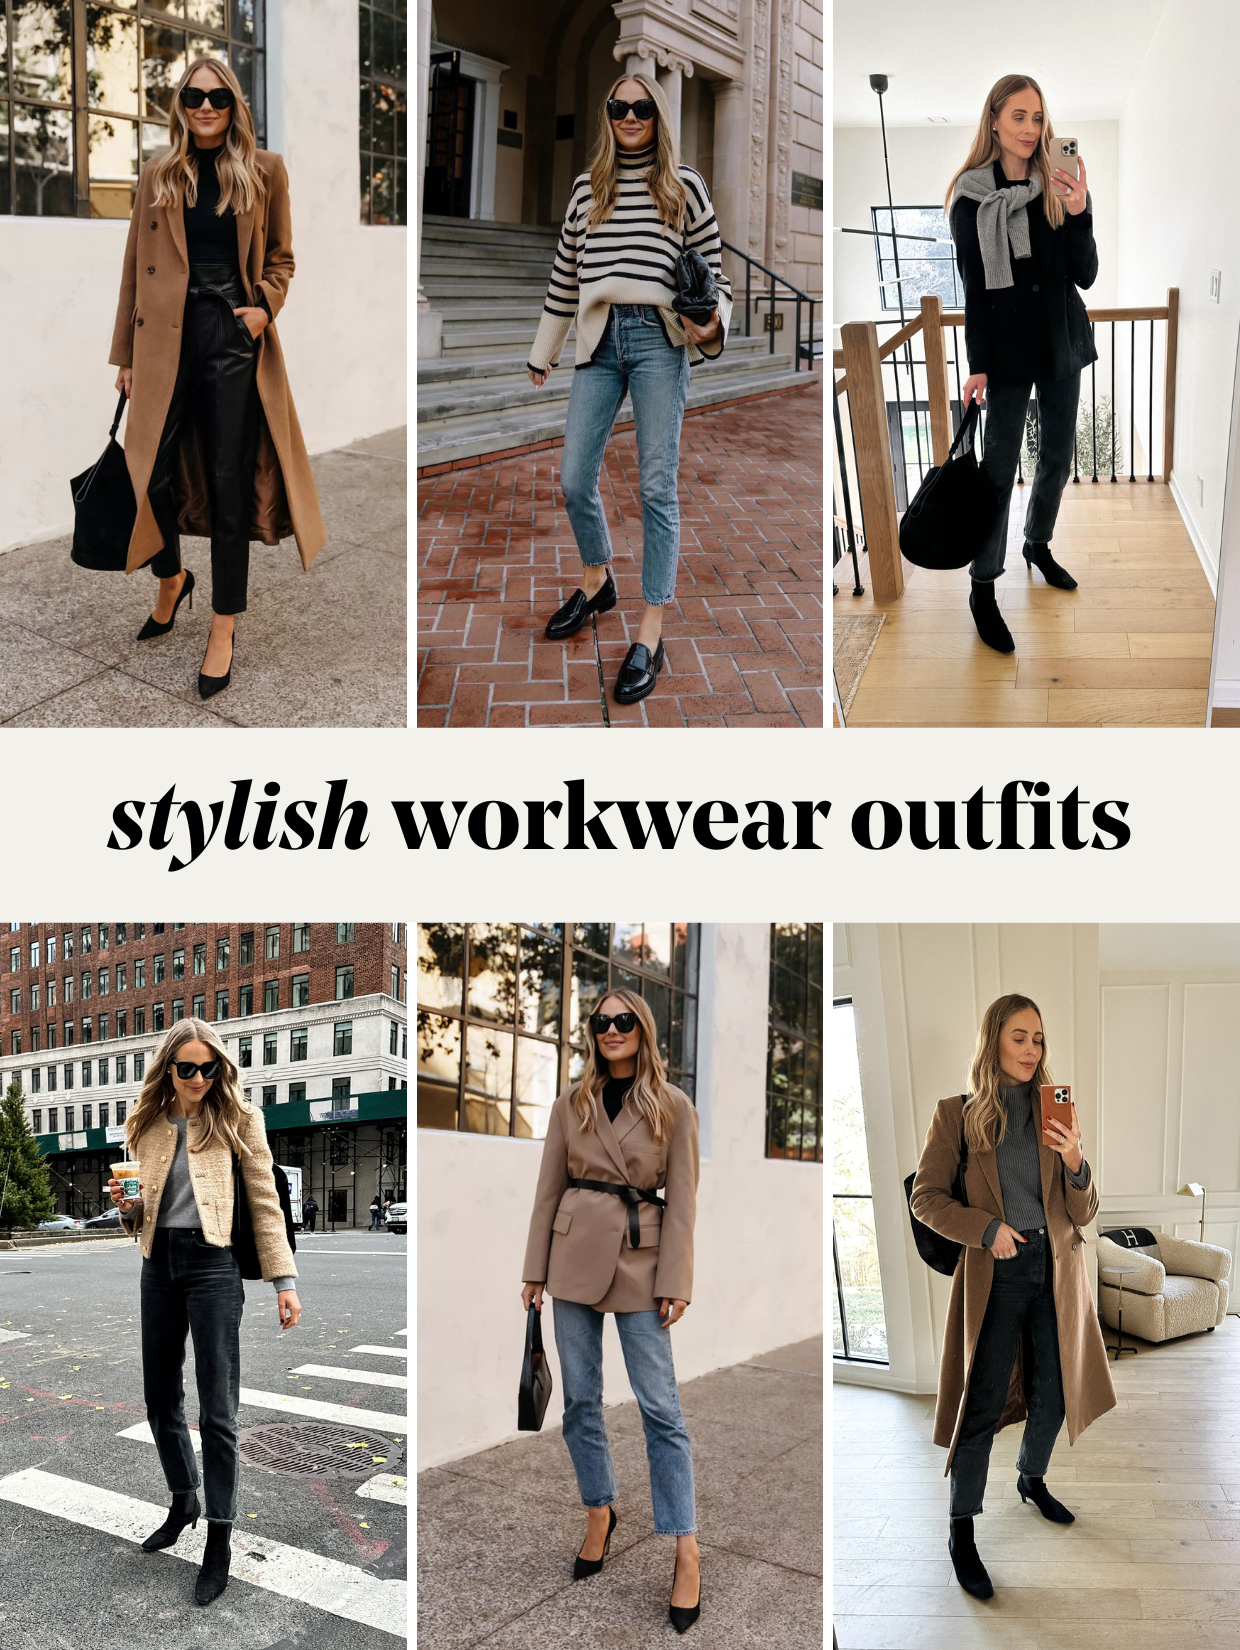 Work outfit ideas. Here are 5 work outfits that range from formal work